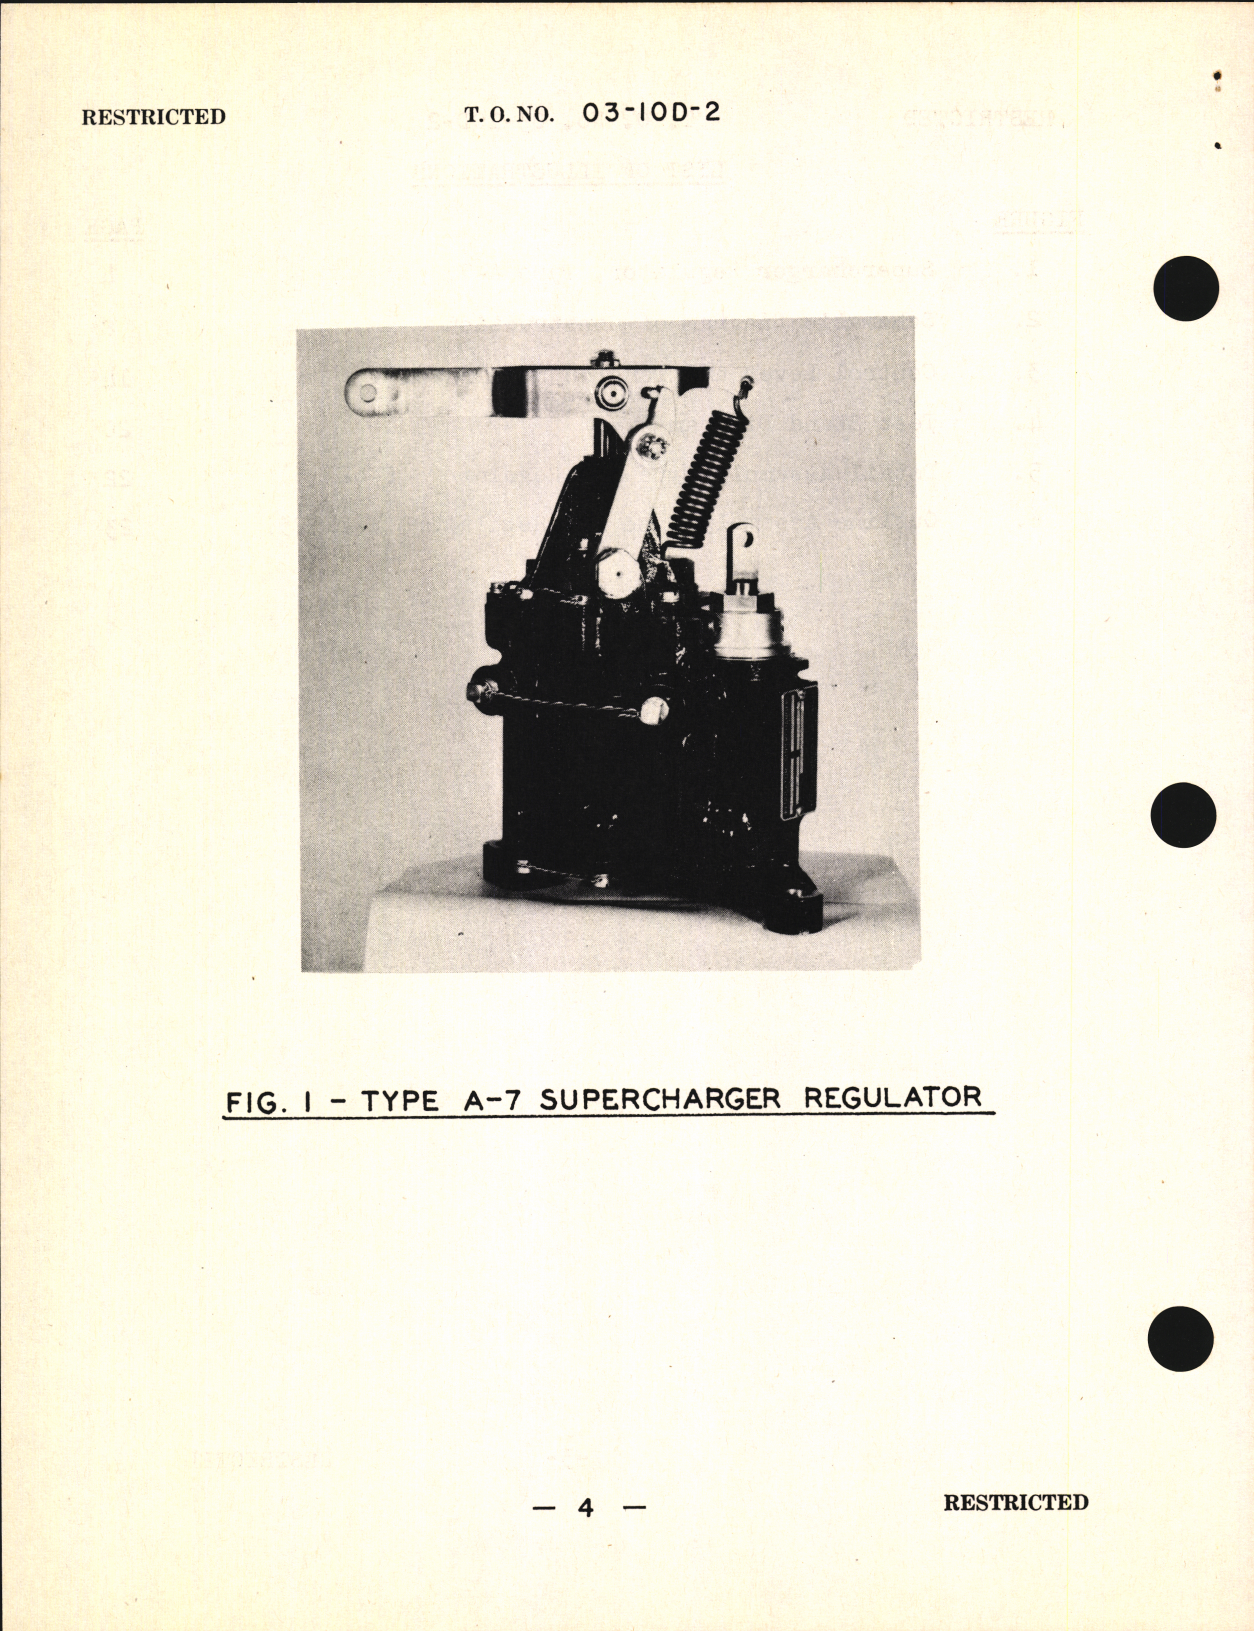 Sample page 6 from AirCorps Library document: Preliminary Handbook of Instructions for Type A-7 Supercharger Regulator